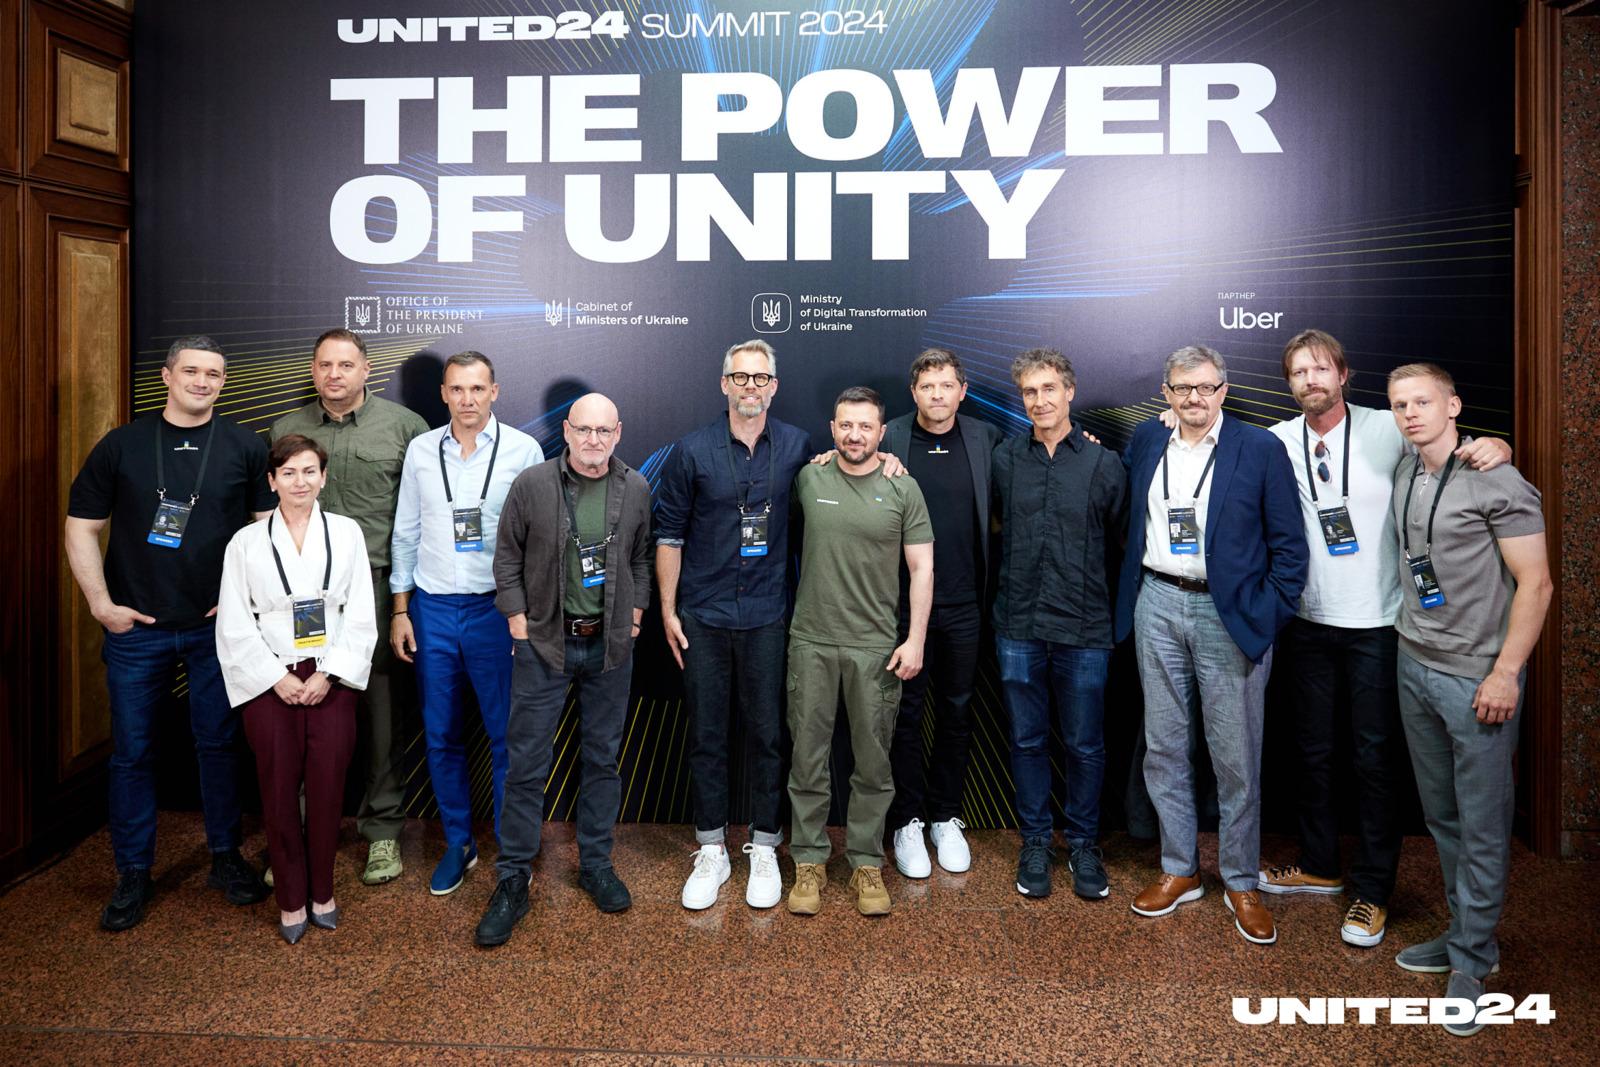 UNITED24 ambassadors will help with information support for the Peace Summit. 